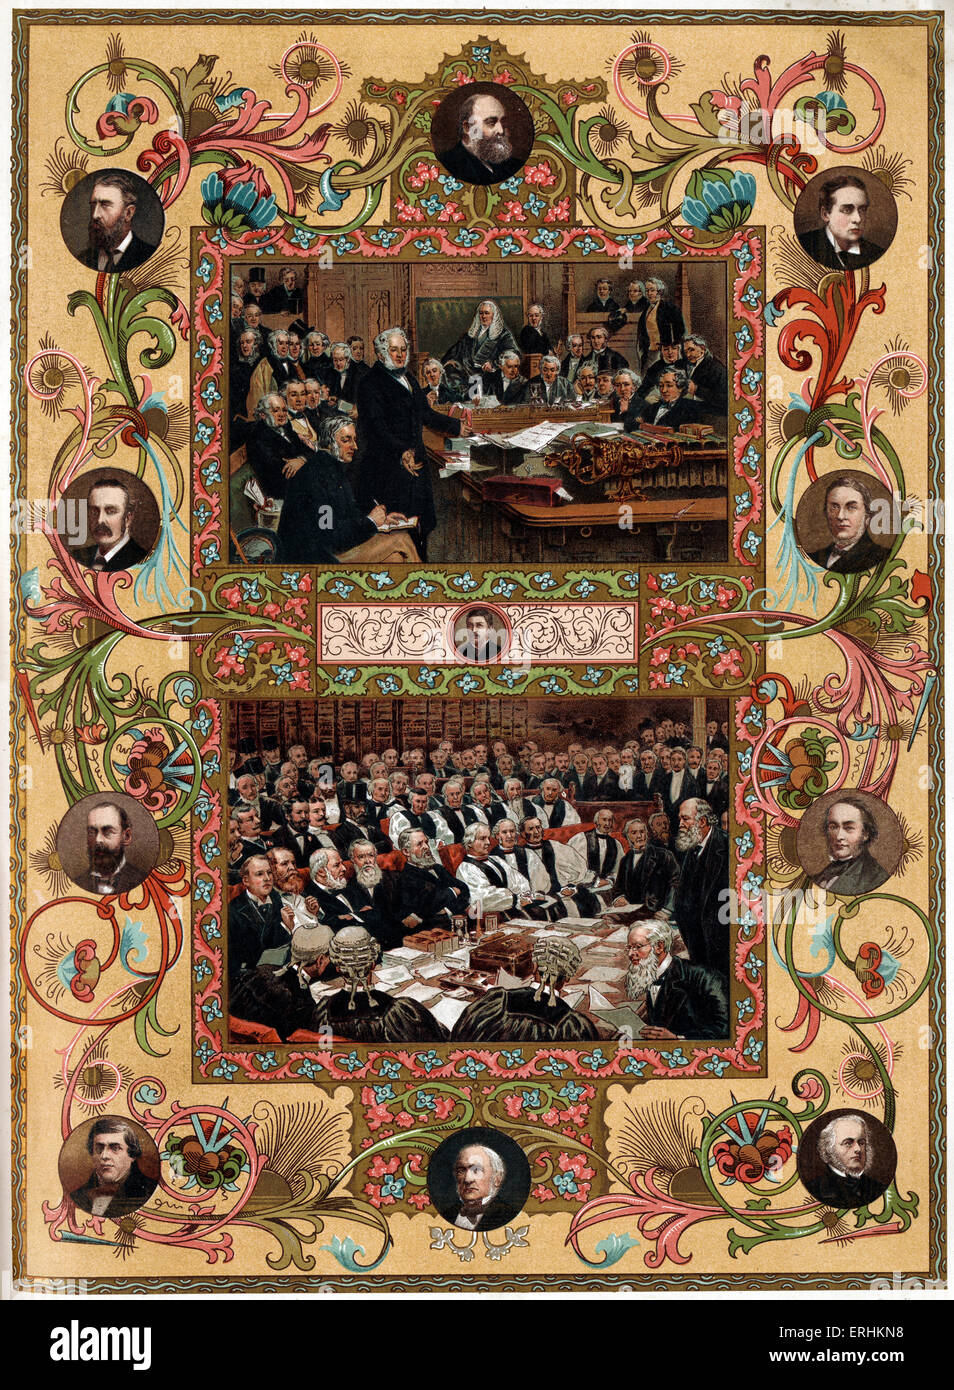 Victorian Era - Lord Palmerston addressing the House of Commons in 1860 (top) and the House of Lords debating the Home Rule Bill in 1893 (bottom). With portraits of Devonshire, Balfour, Randolph Curchill, Herbert Ingram, Salisbury, Gladstone, Rosebery, Harcourt, Cobden, Bright. Stock Photo